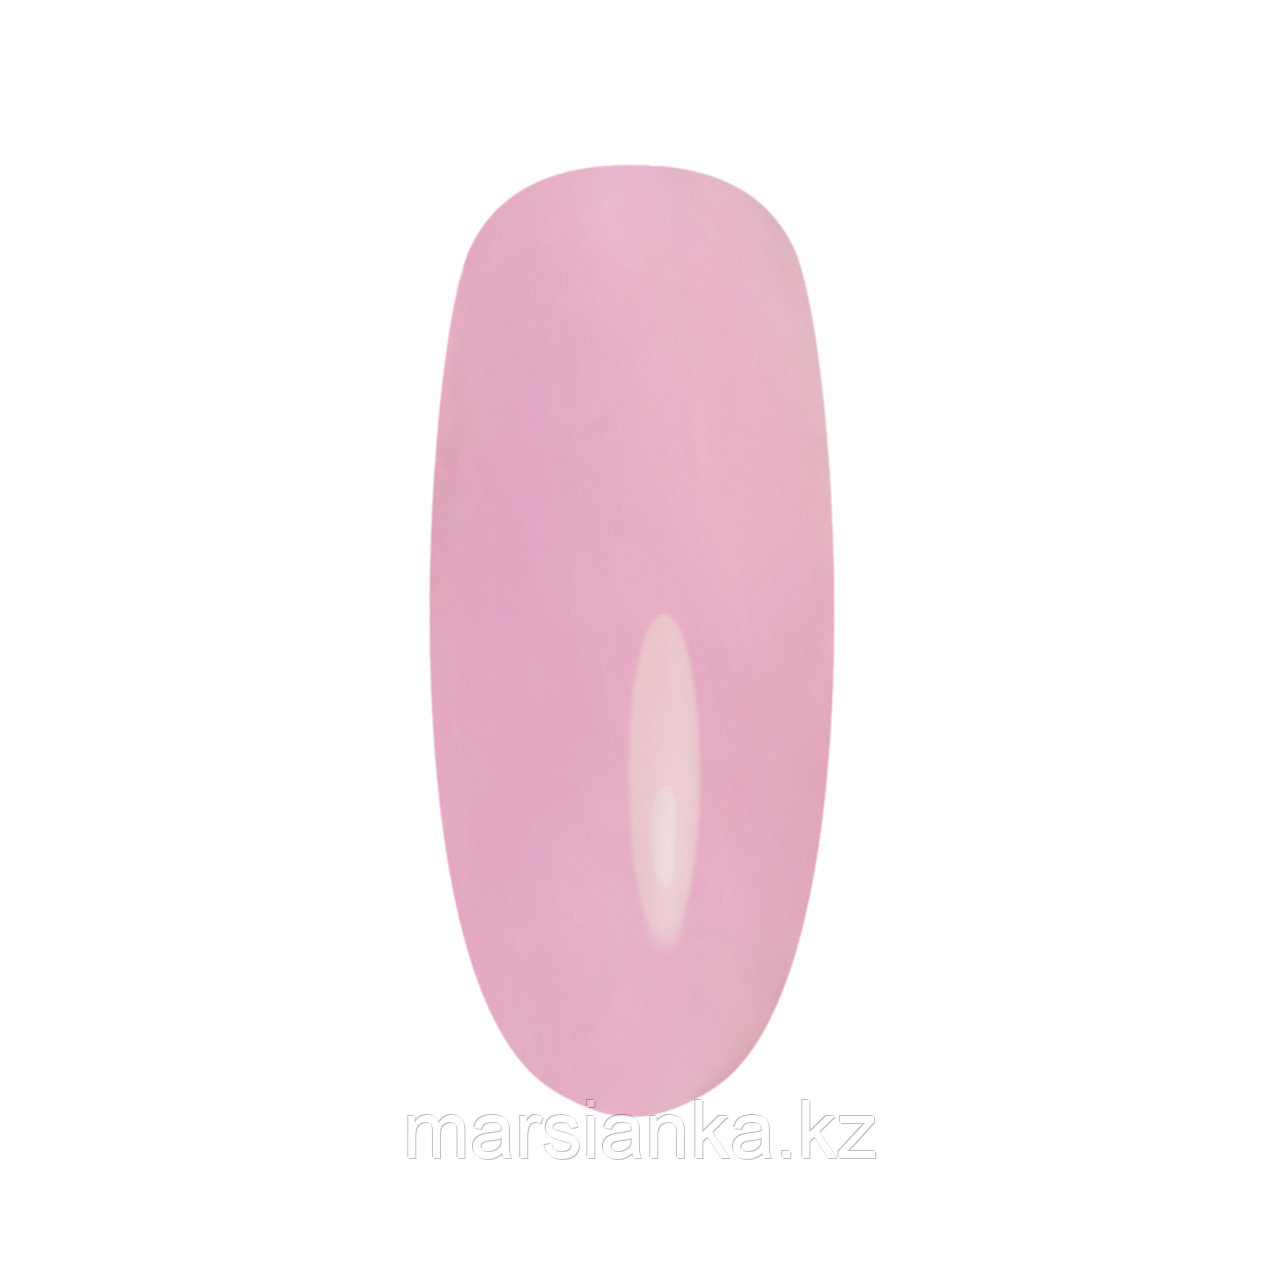 LUX Base Nail Best Nude Rossy, 15мл